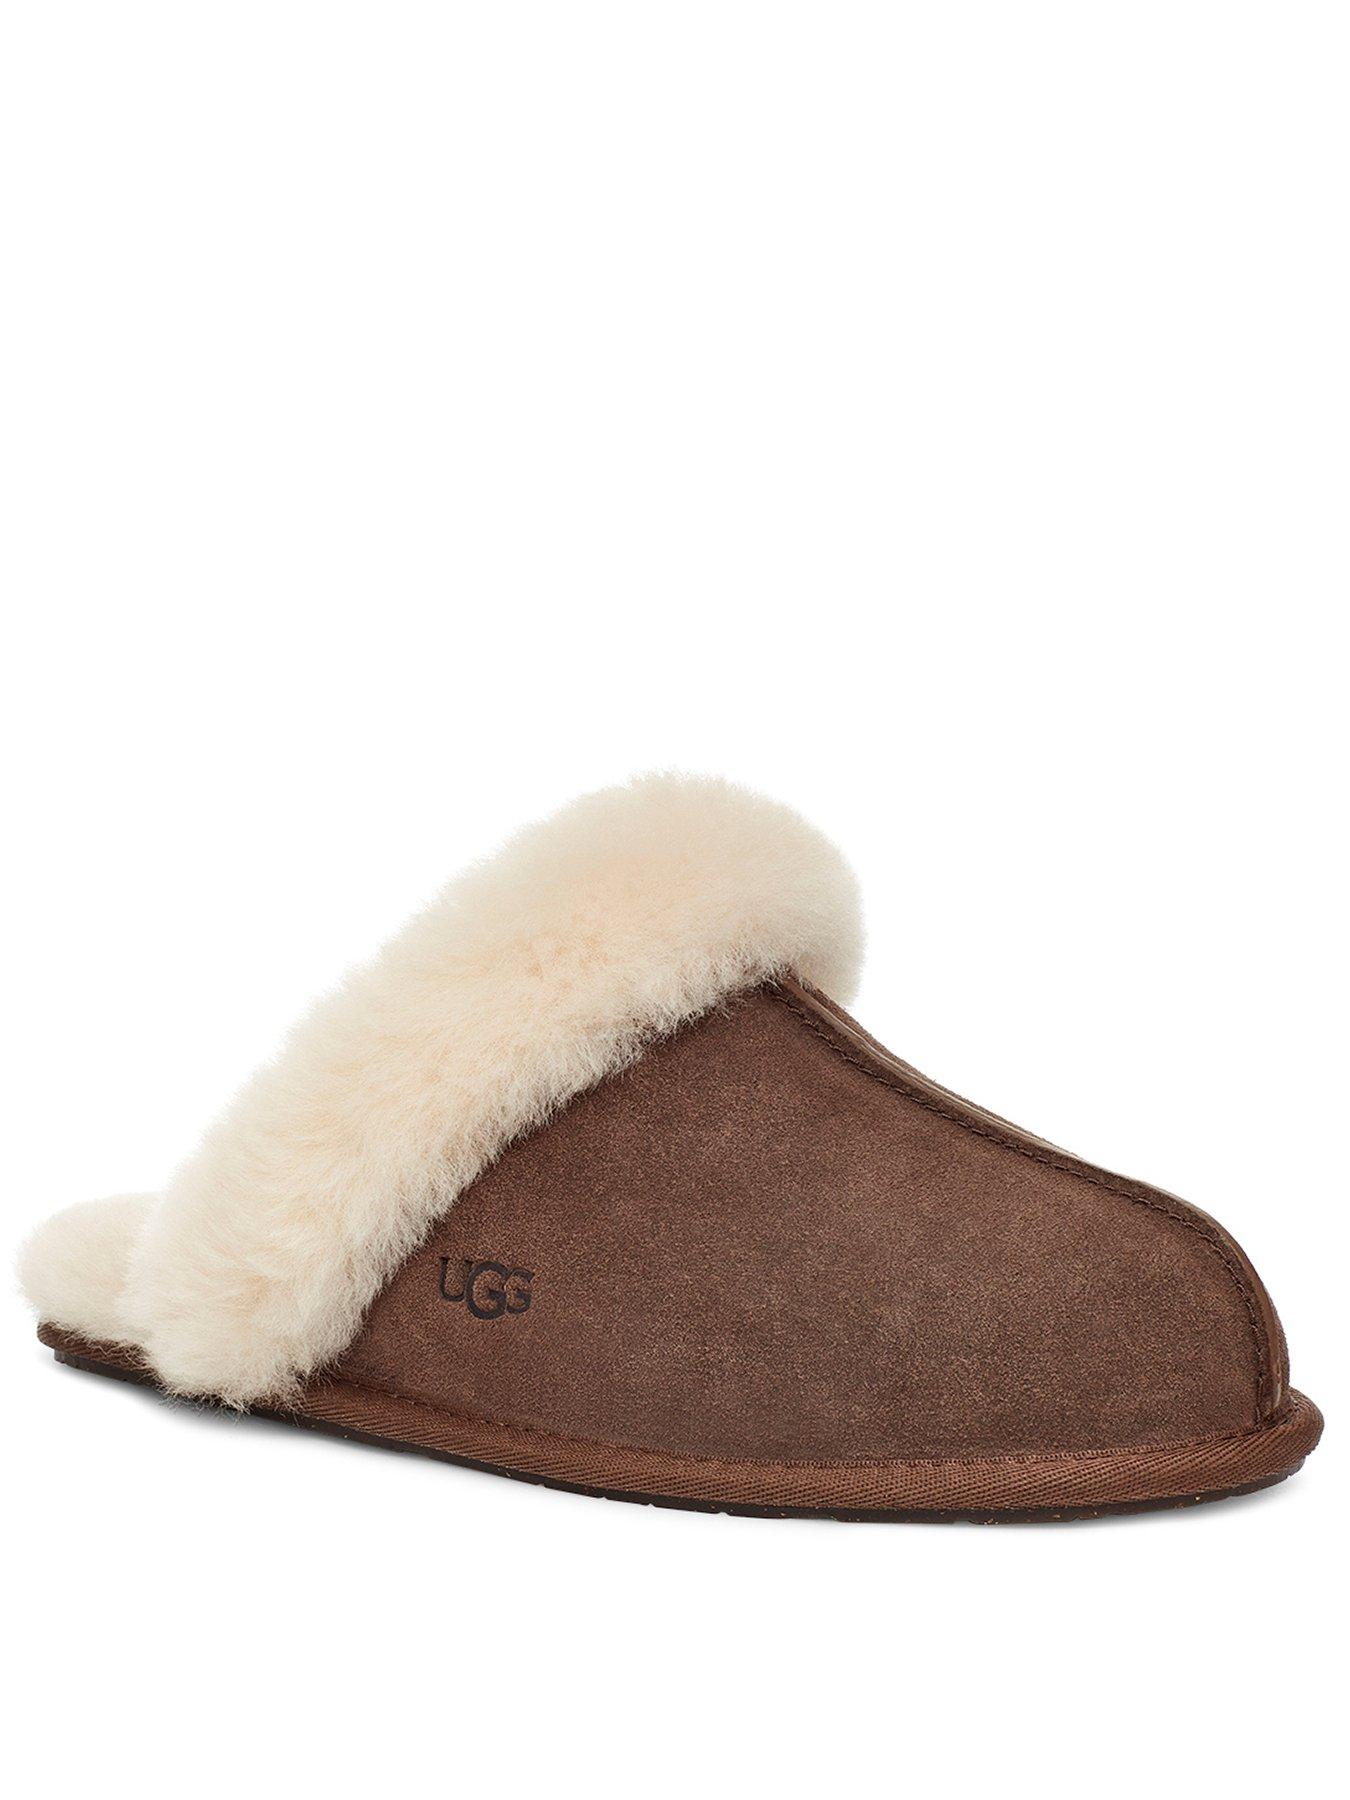 ladies ugg slippers size 8